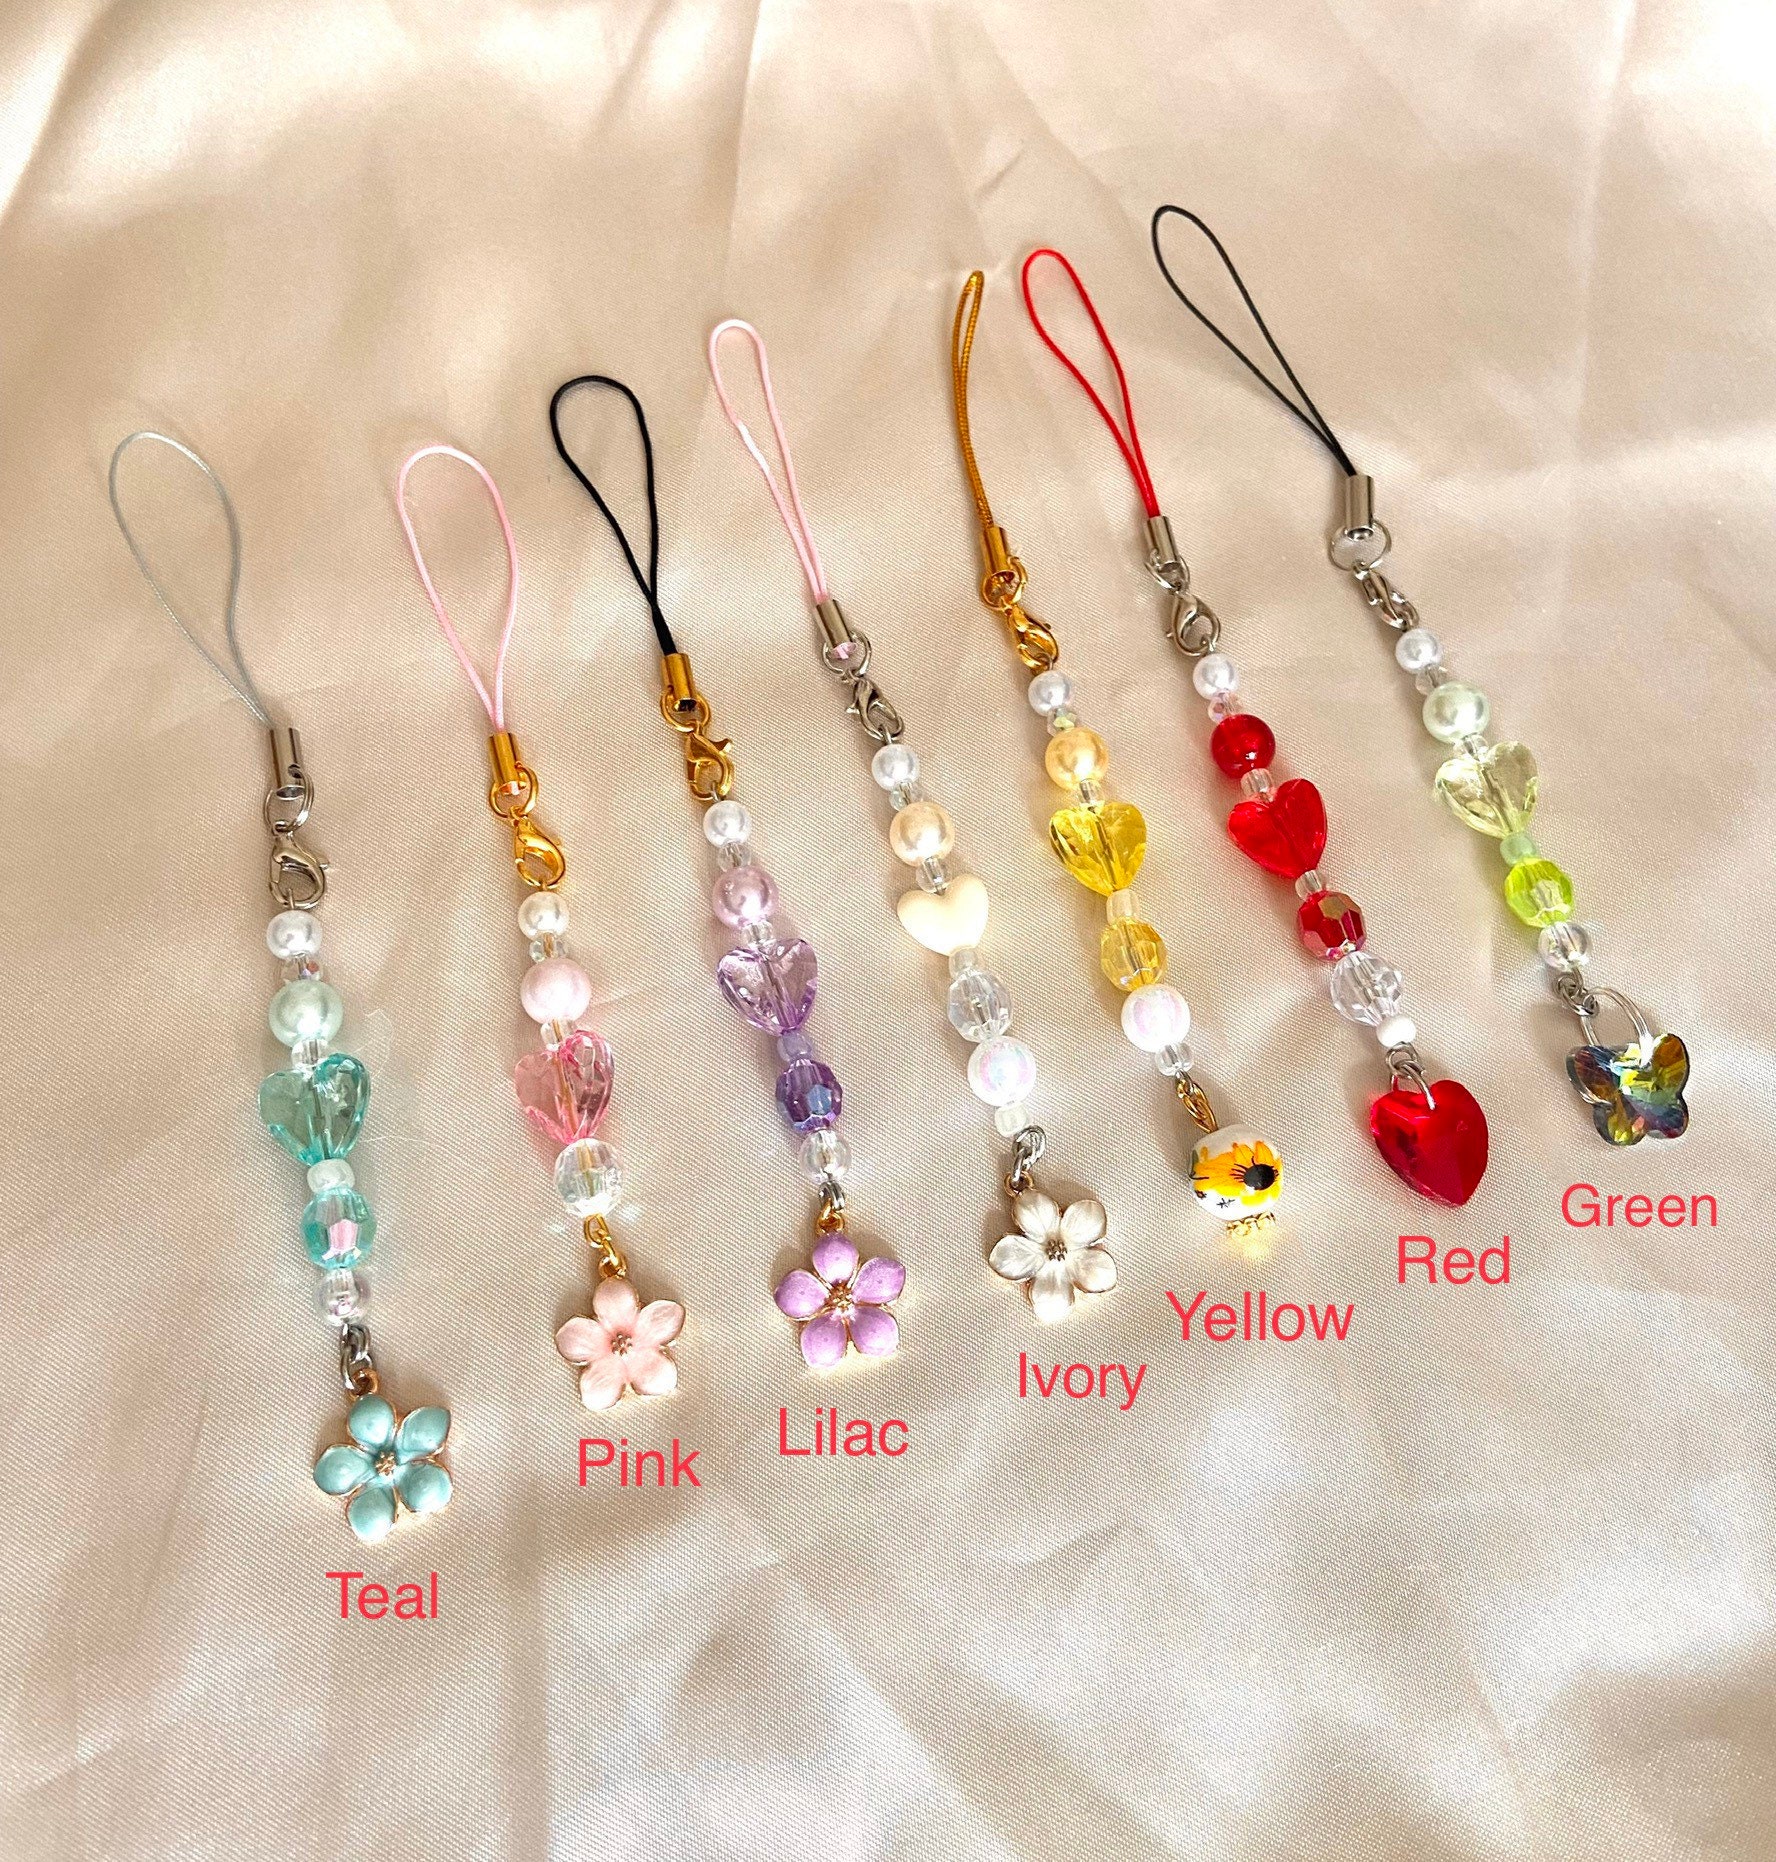 10pcs Vintage Key Charms Pendants – Crystals and Clay Jewelry DIY